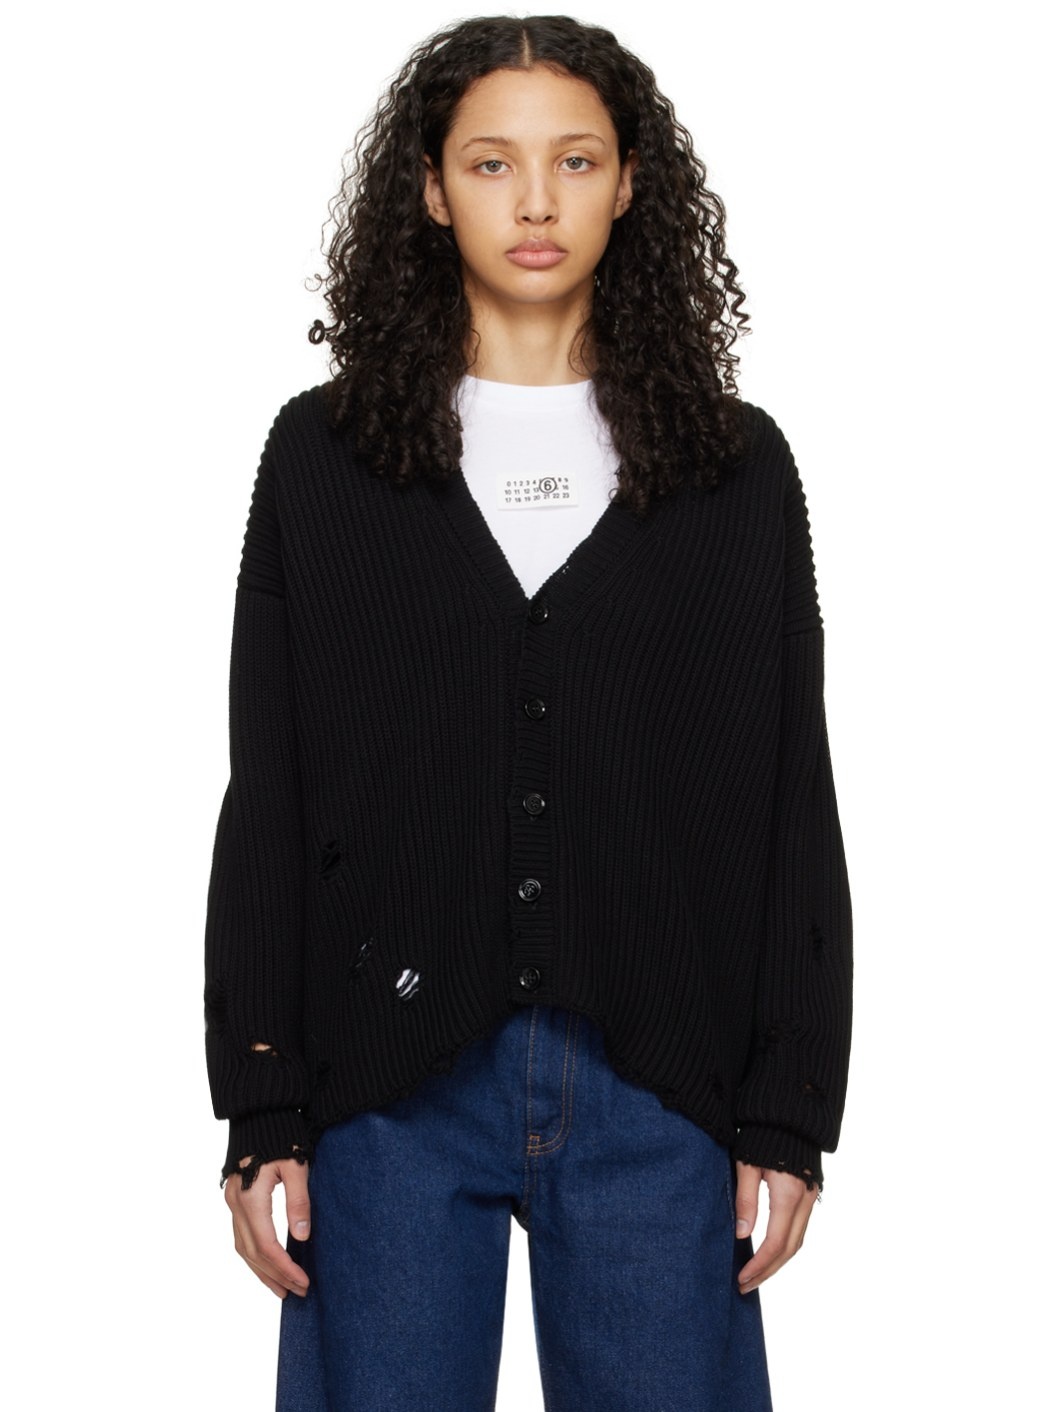 Black Patched Cardigan - 1